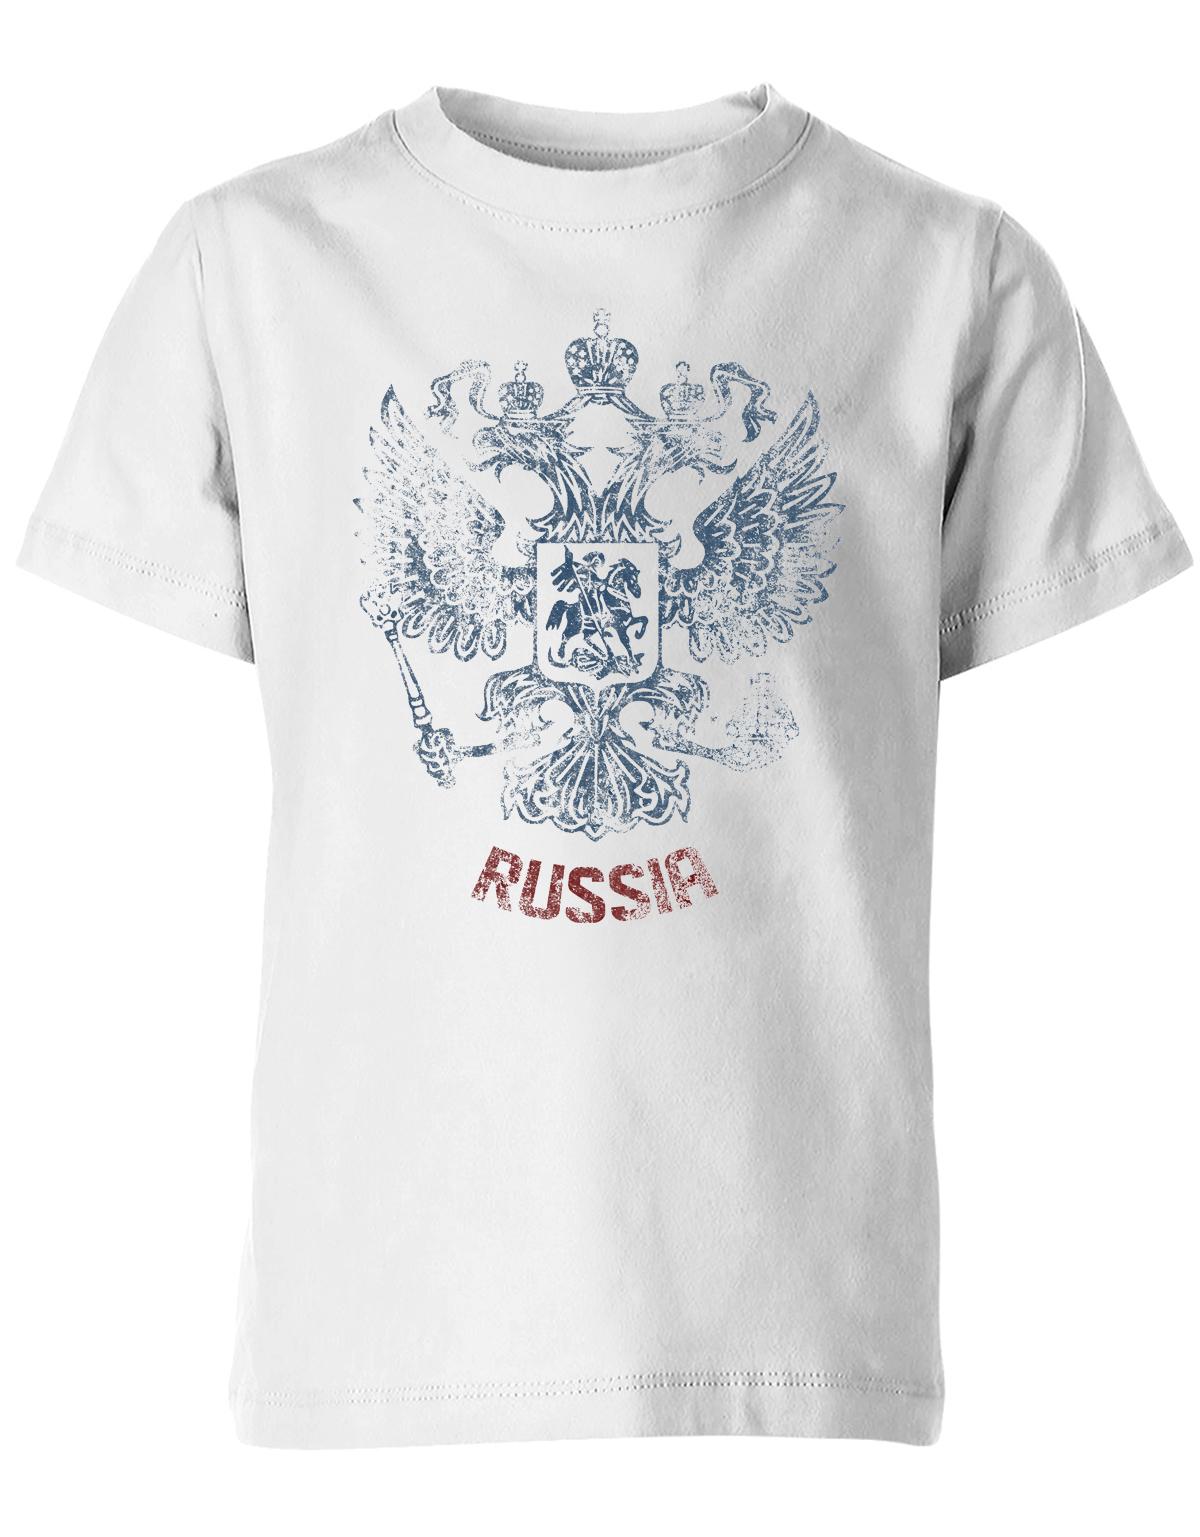 Russia-Vintage-Kinder-Weiss